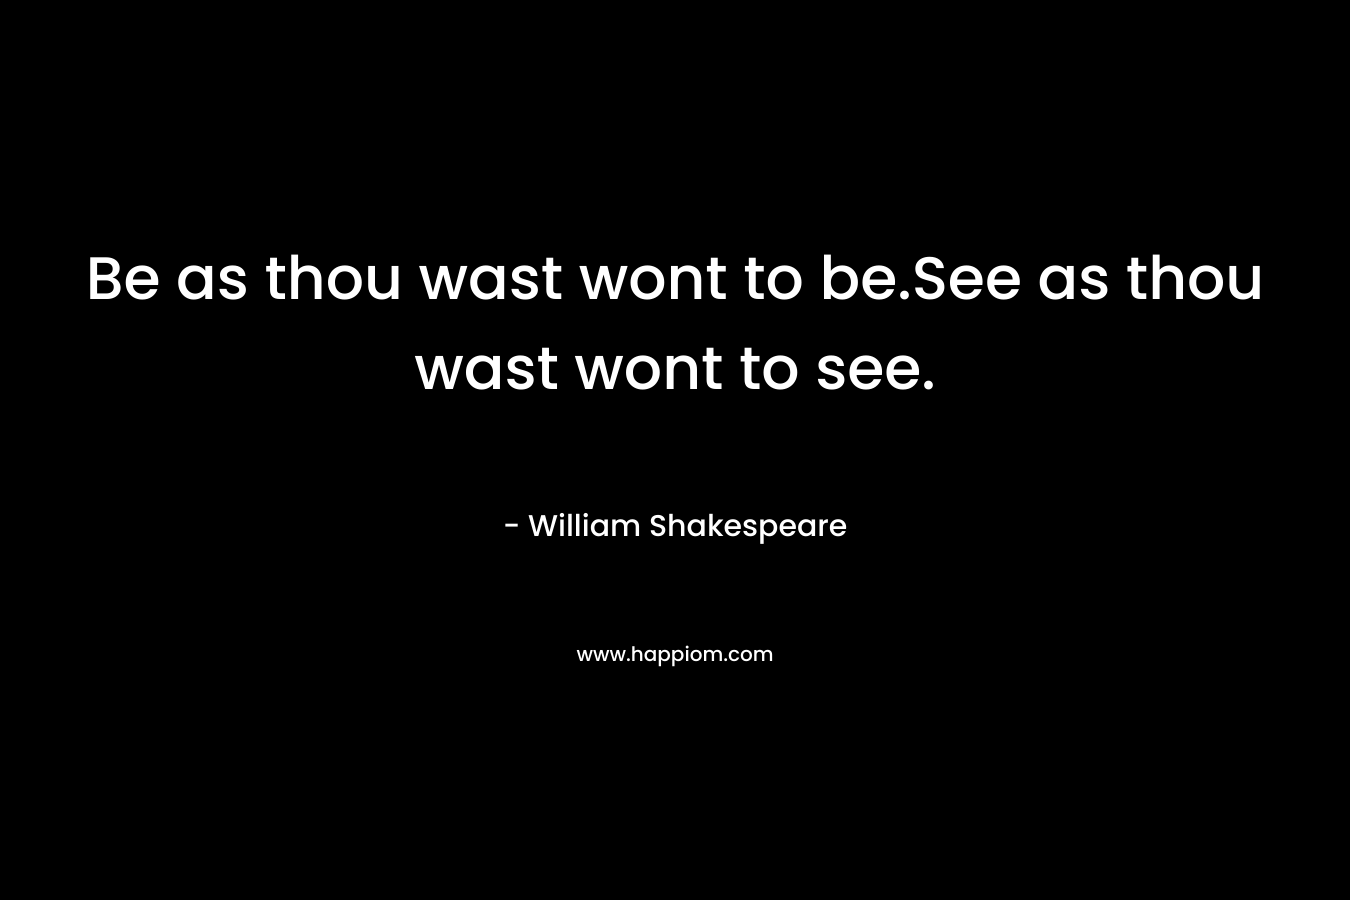 Be as thou wast wont to be.See as thou wast wont to see.